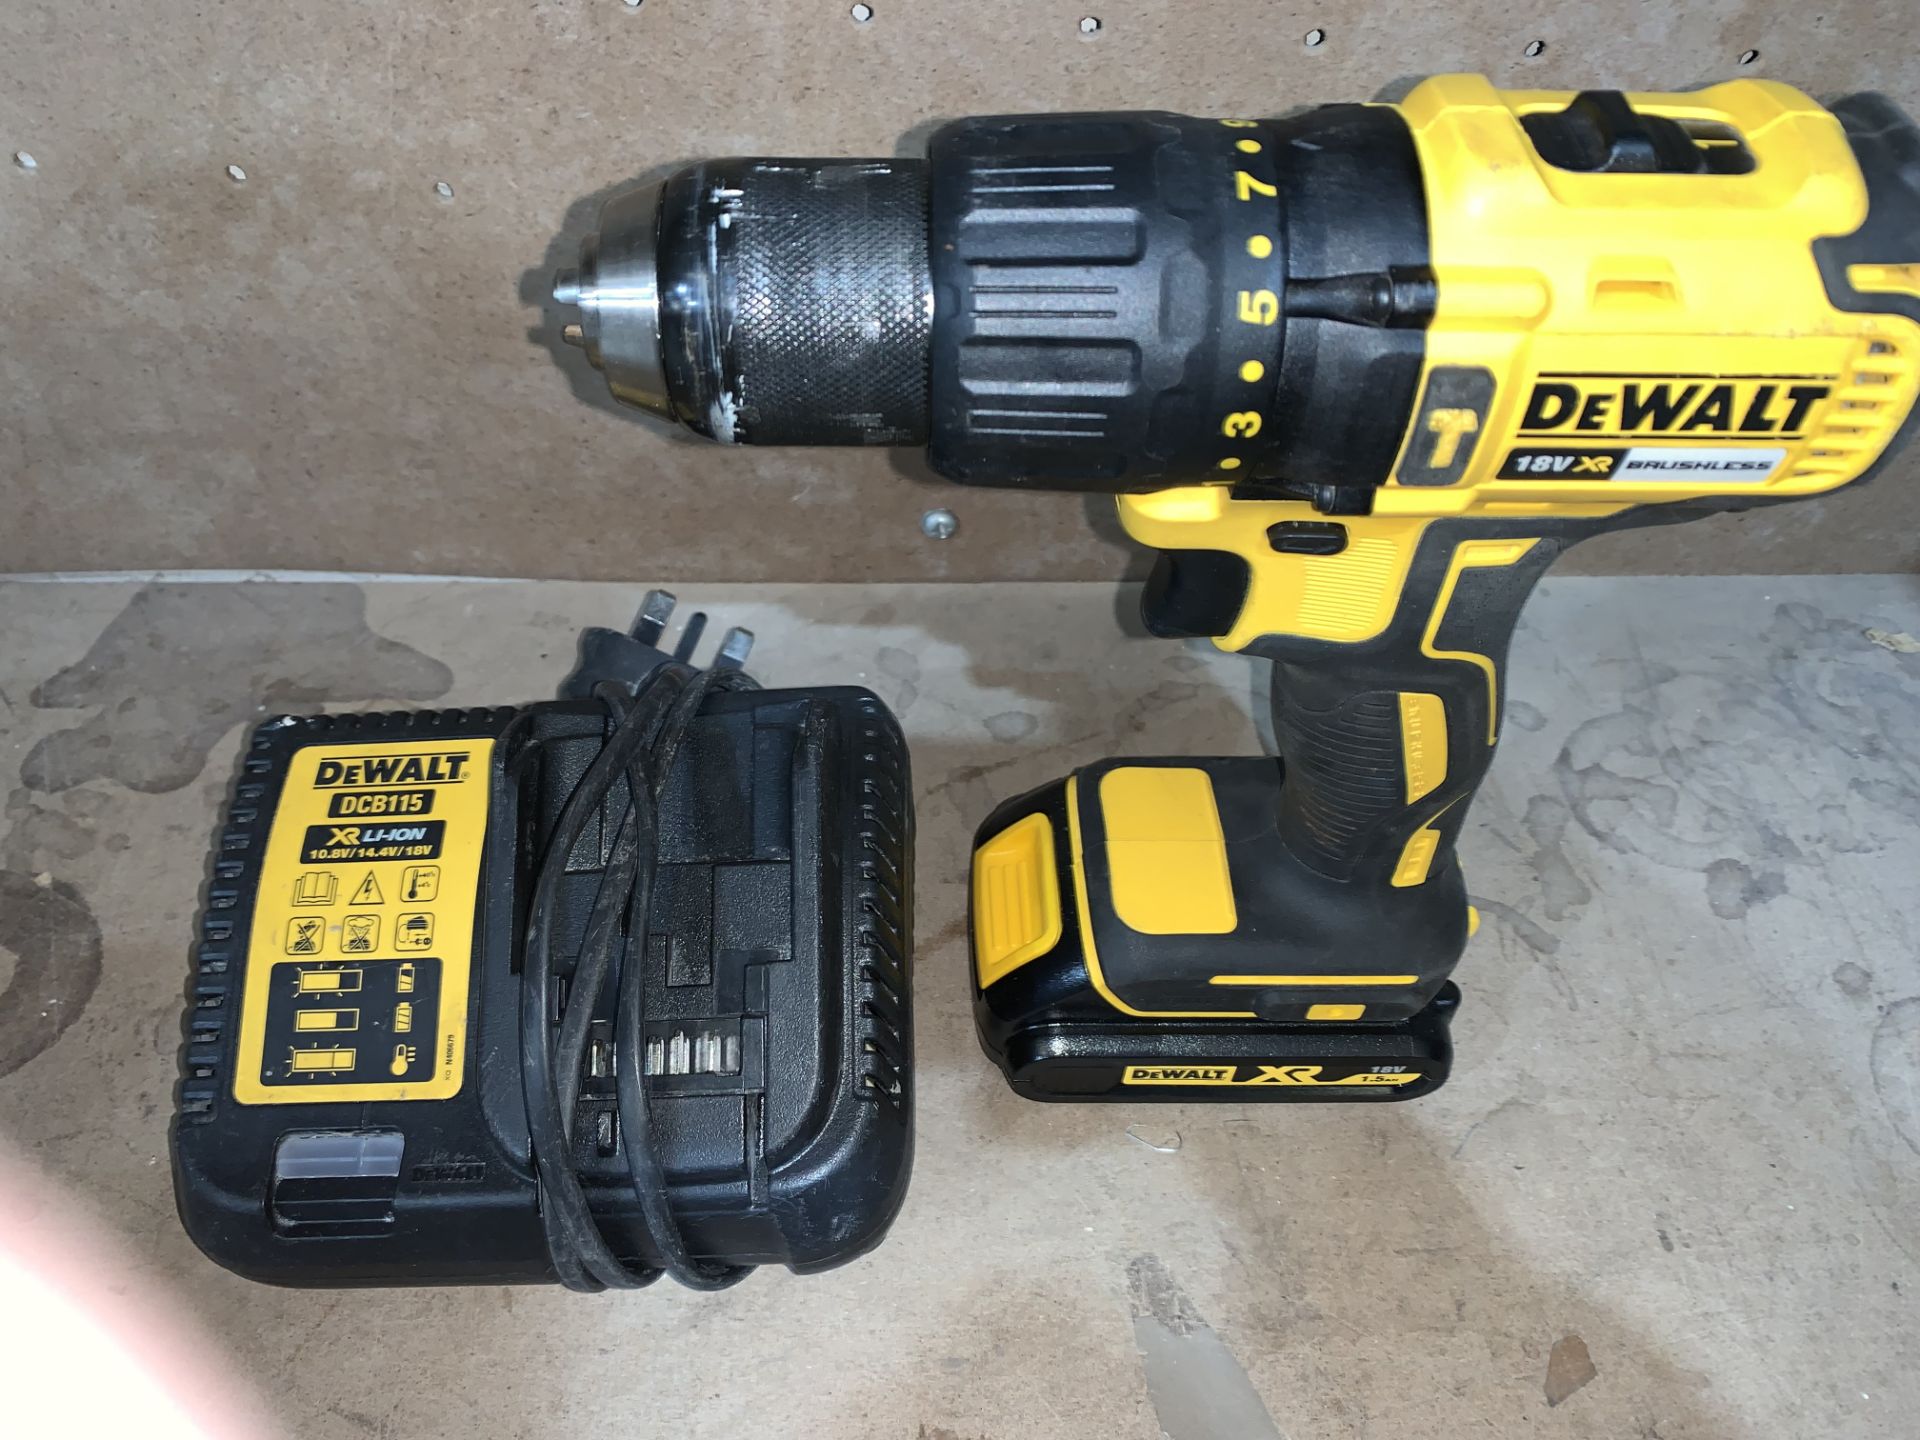 DEWALT CORDLESS BRUSHLESS COMBI DRILL COMES WITH BATTERY, AND CHARGER (UNCHECKED, UNTESTED)